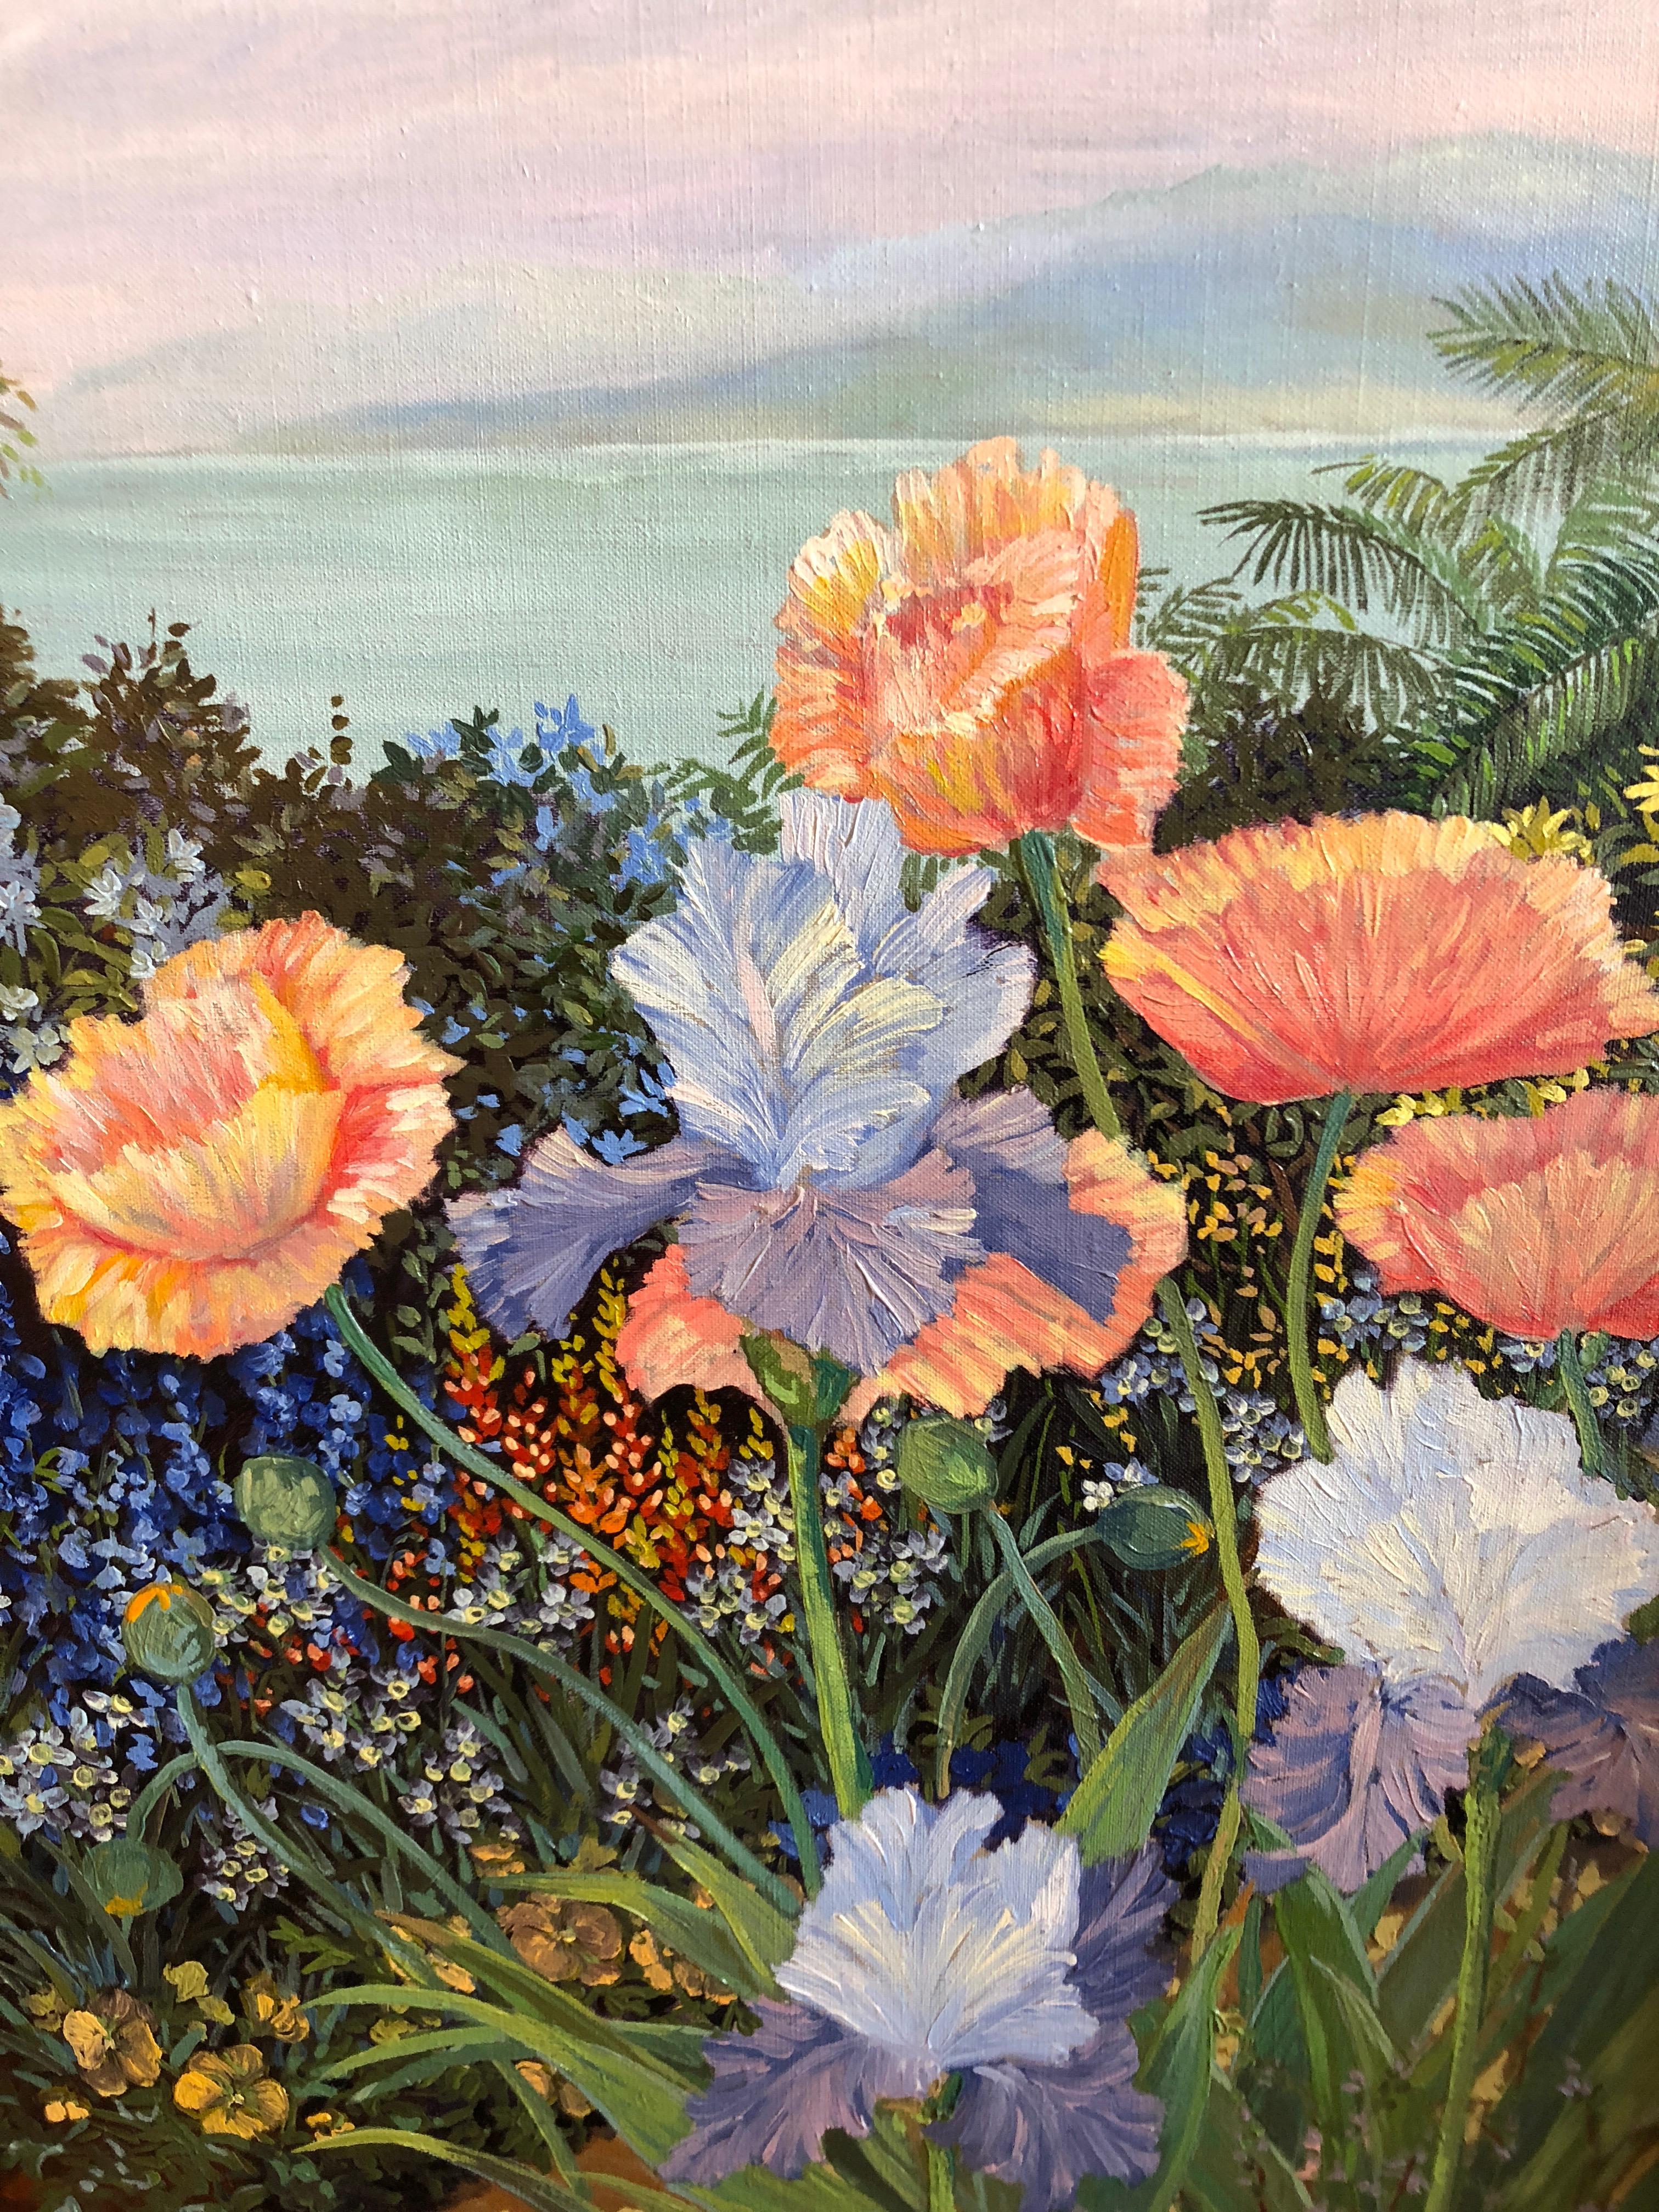 A meticulously detailed floral by renowned artist John Powell, a rare original on canvas. Usually Powell's are serigraphs. Unframed canvas measures 17.5 x 23.